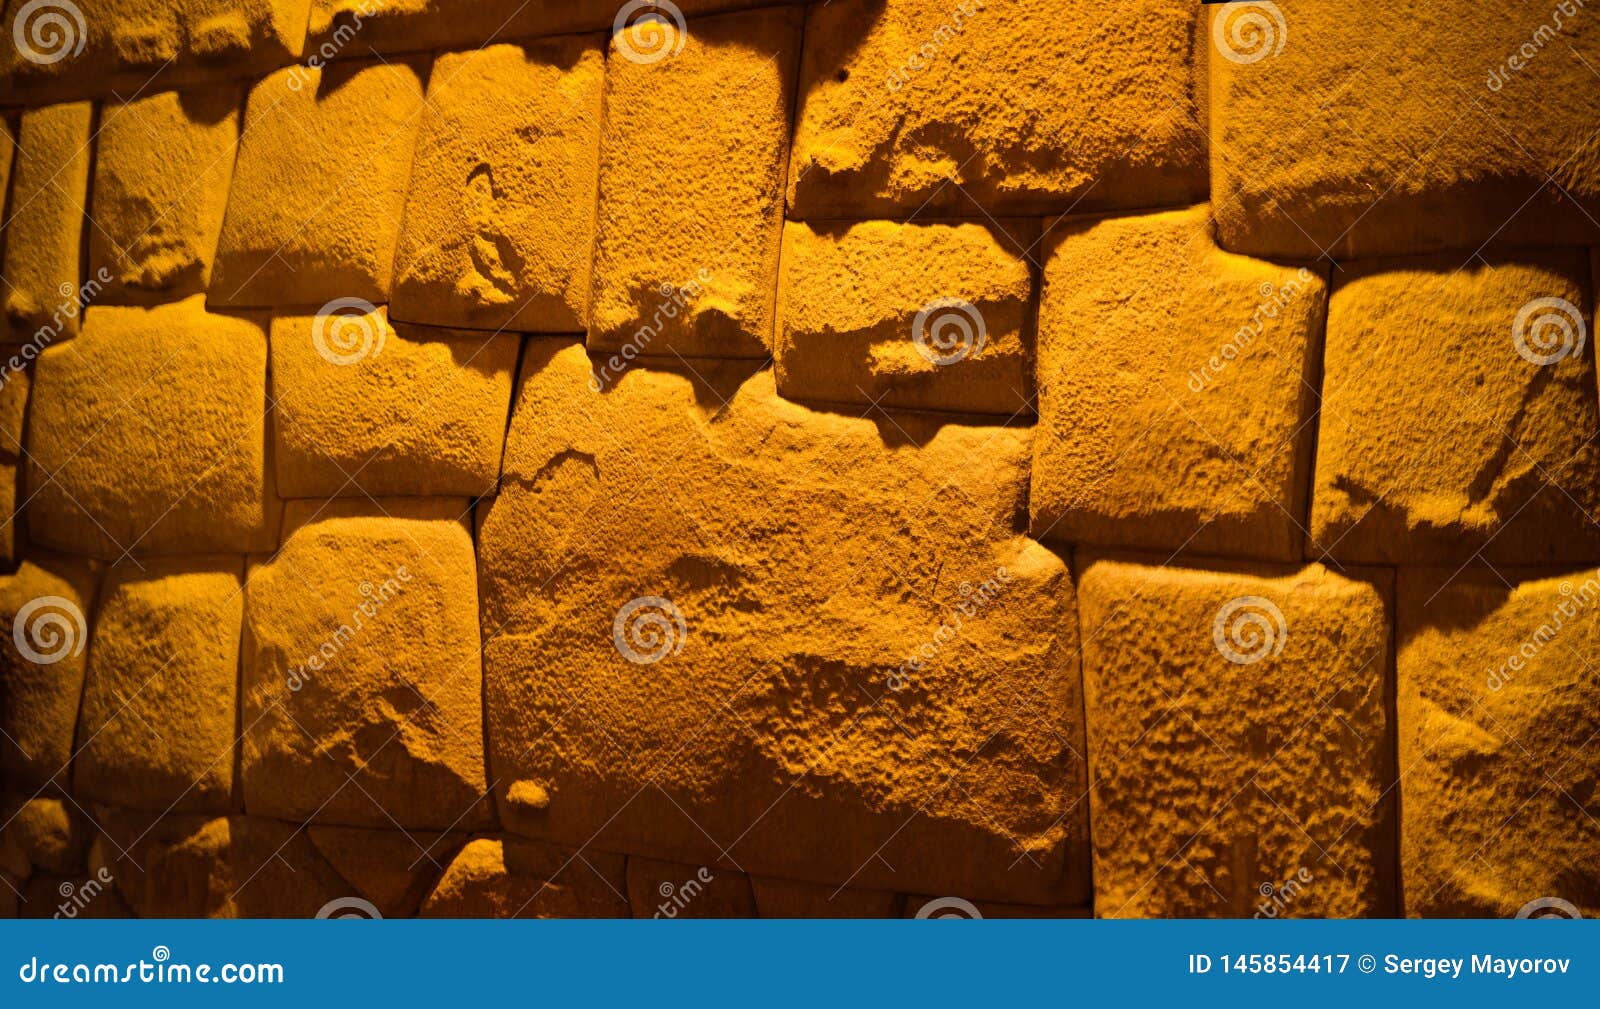 view to twelve-angled stone aka hatun rumiyoc as a part of a wall of the palace of the archbishop of cuzco, peru